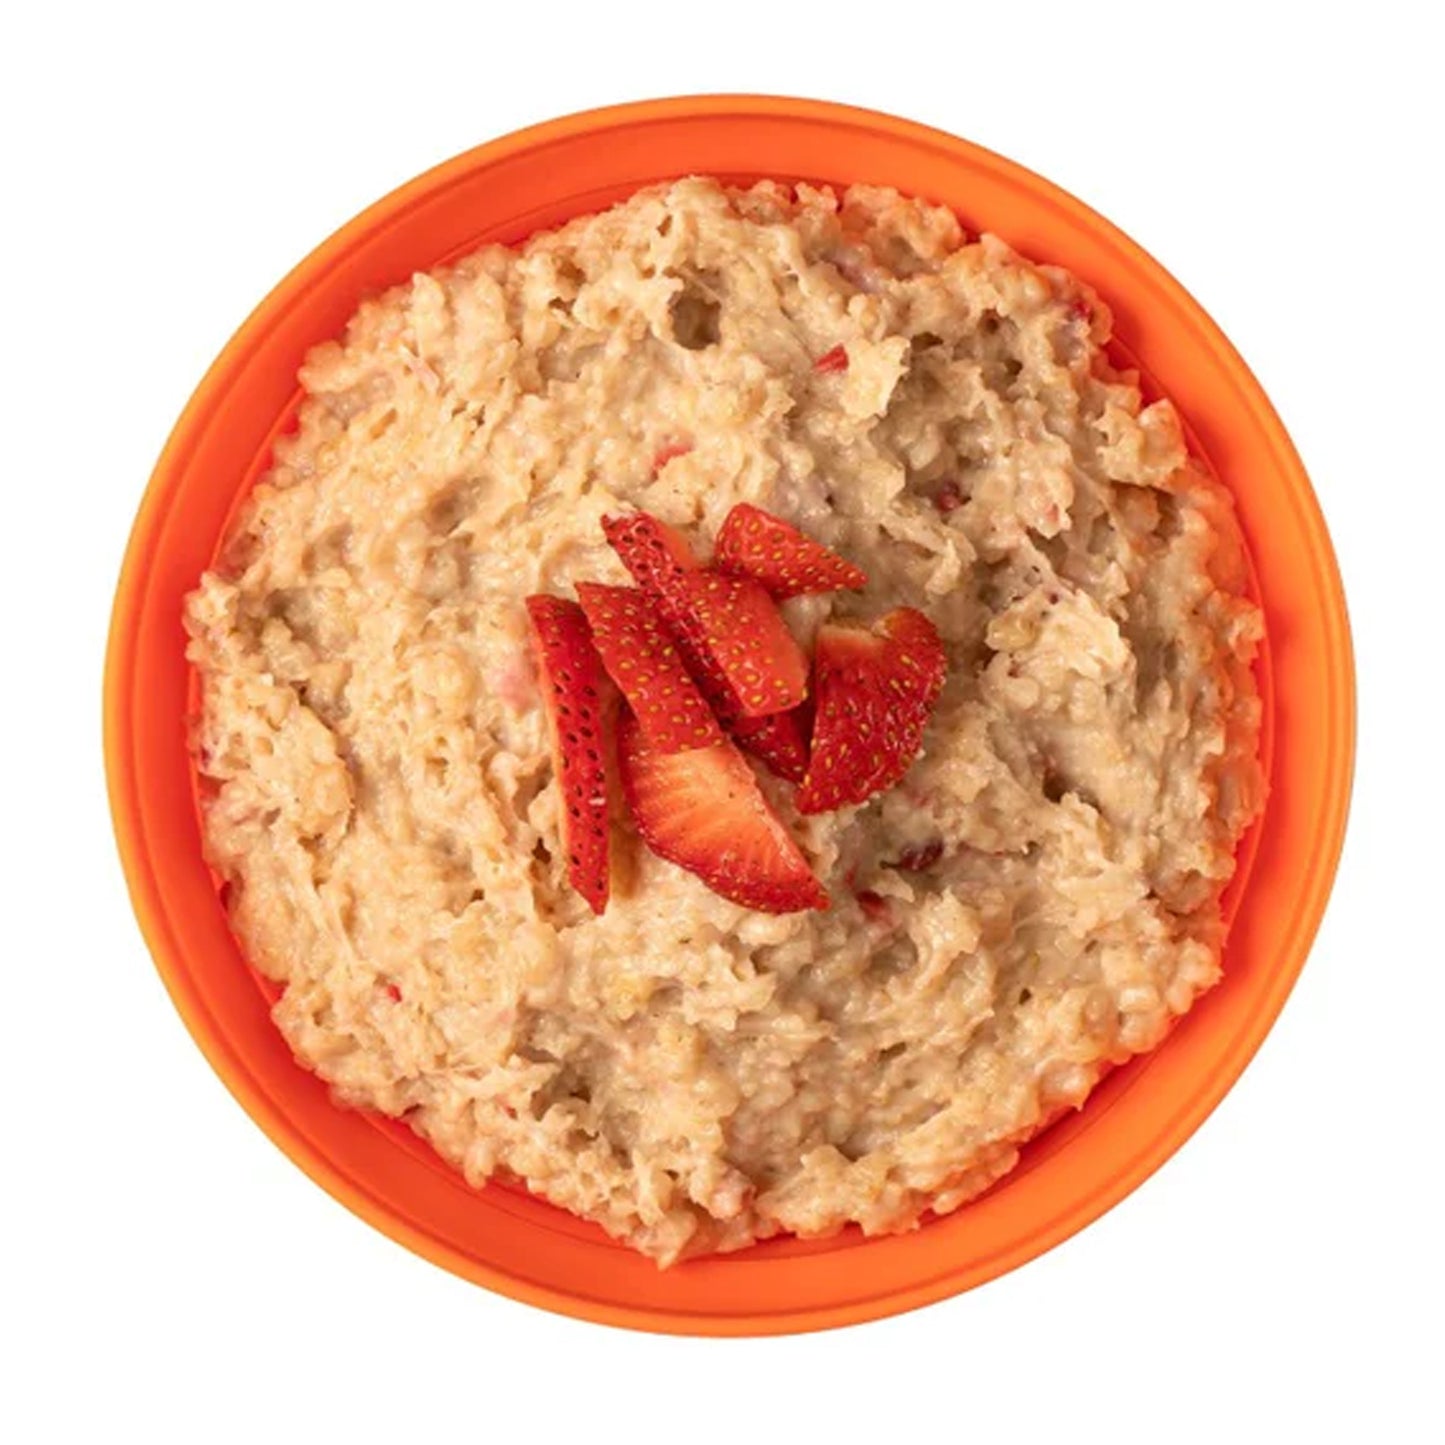 Expedition Foods Porridge with Strawberries Meal